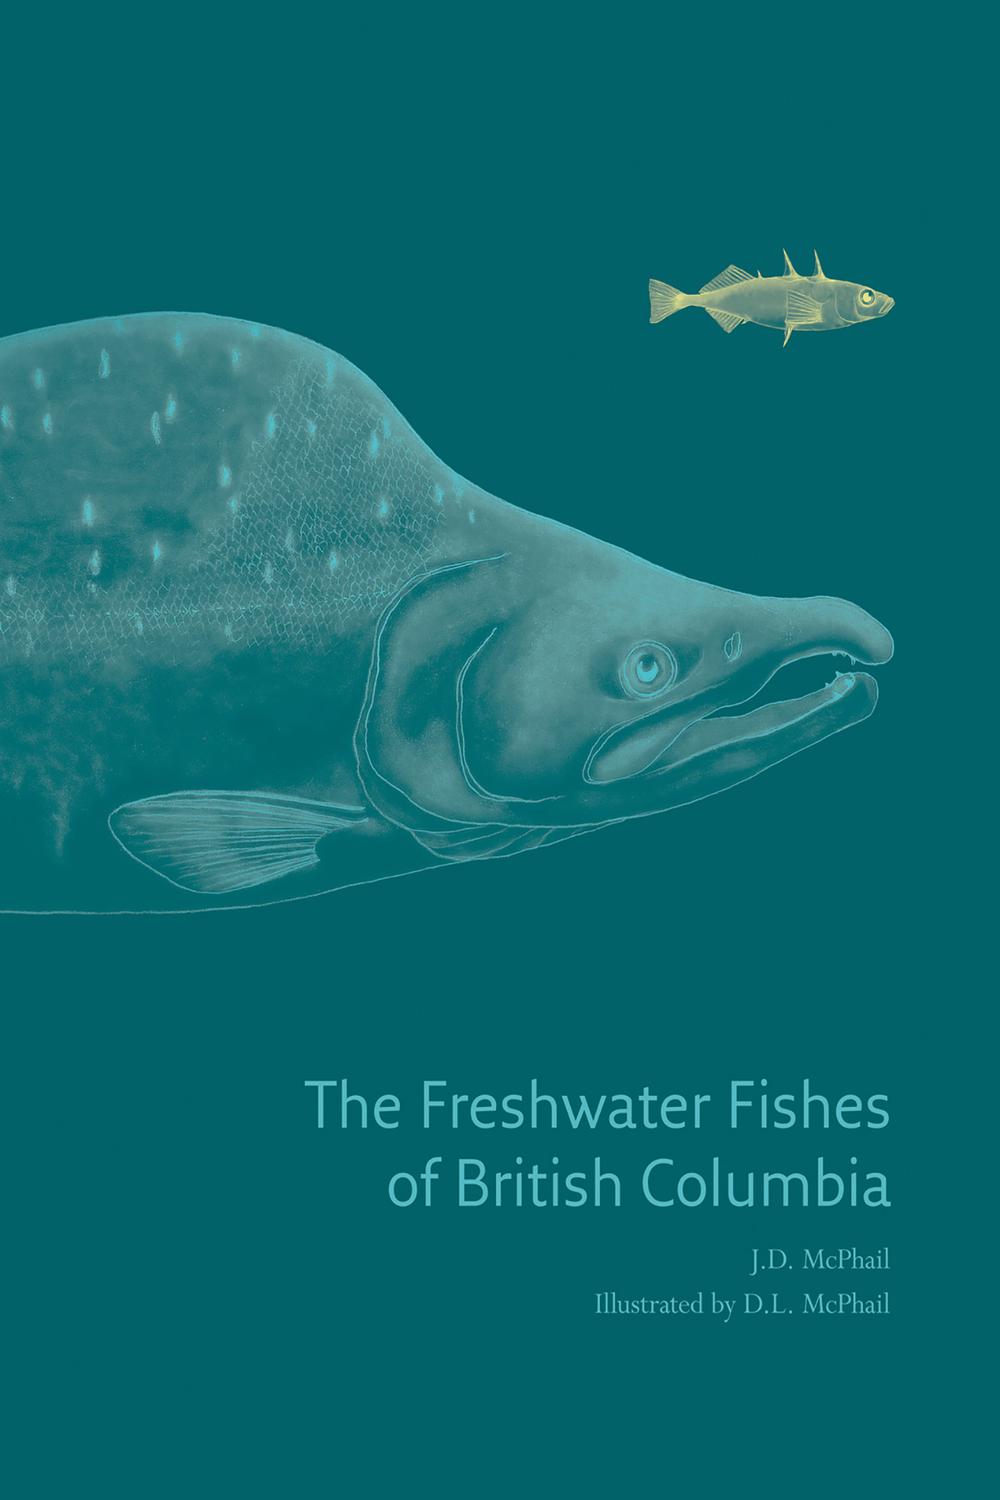 The Freshwater Fishes of British Columbia - J.D. McPhail, D.L. McPhail